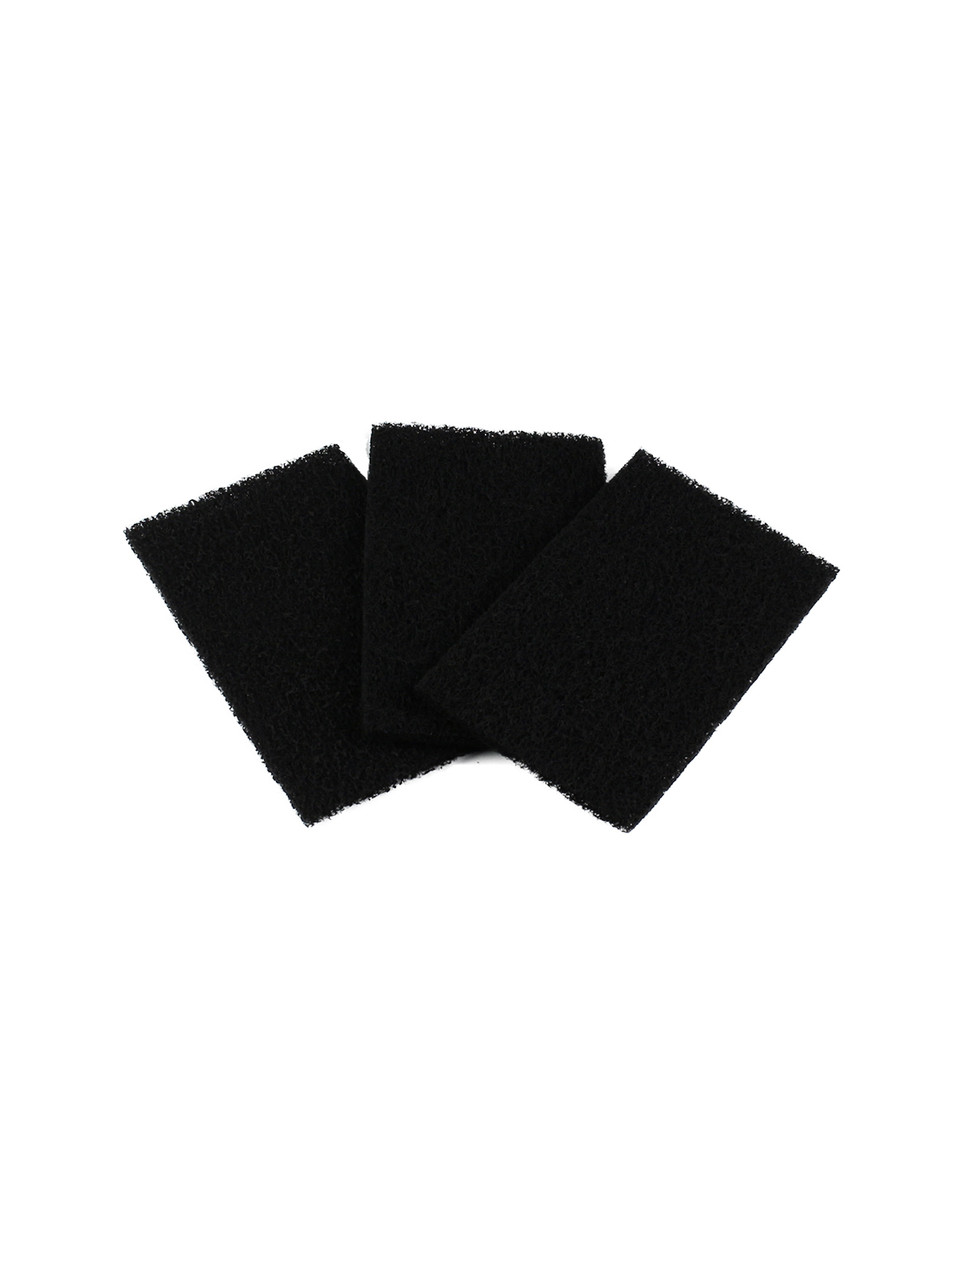 Charcoal Filter for Kitchen Compost Bin 103758 (3-Pack)